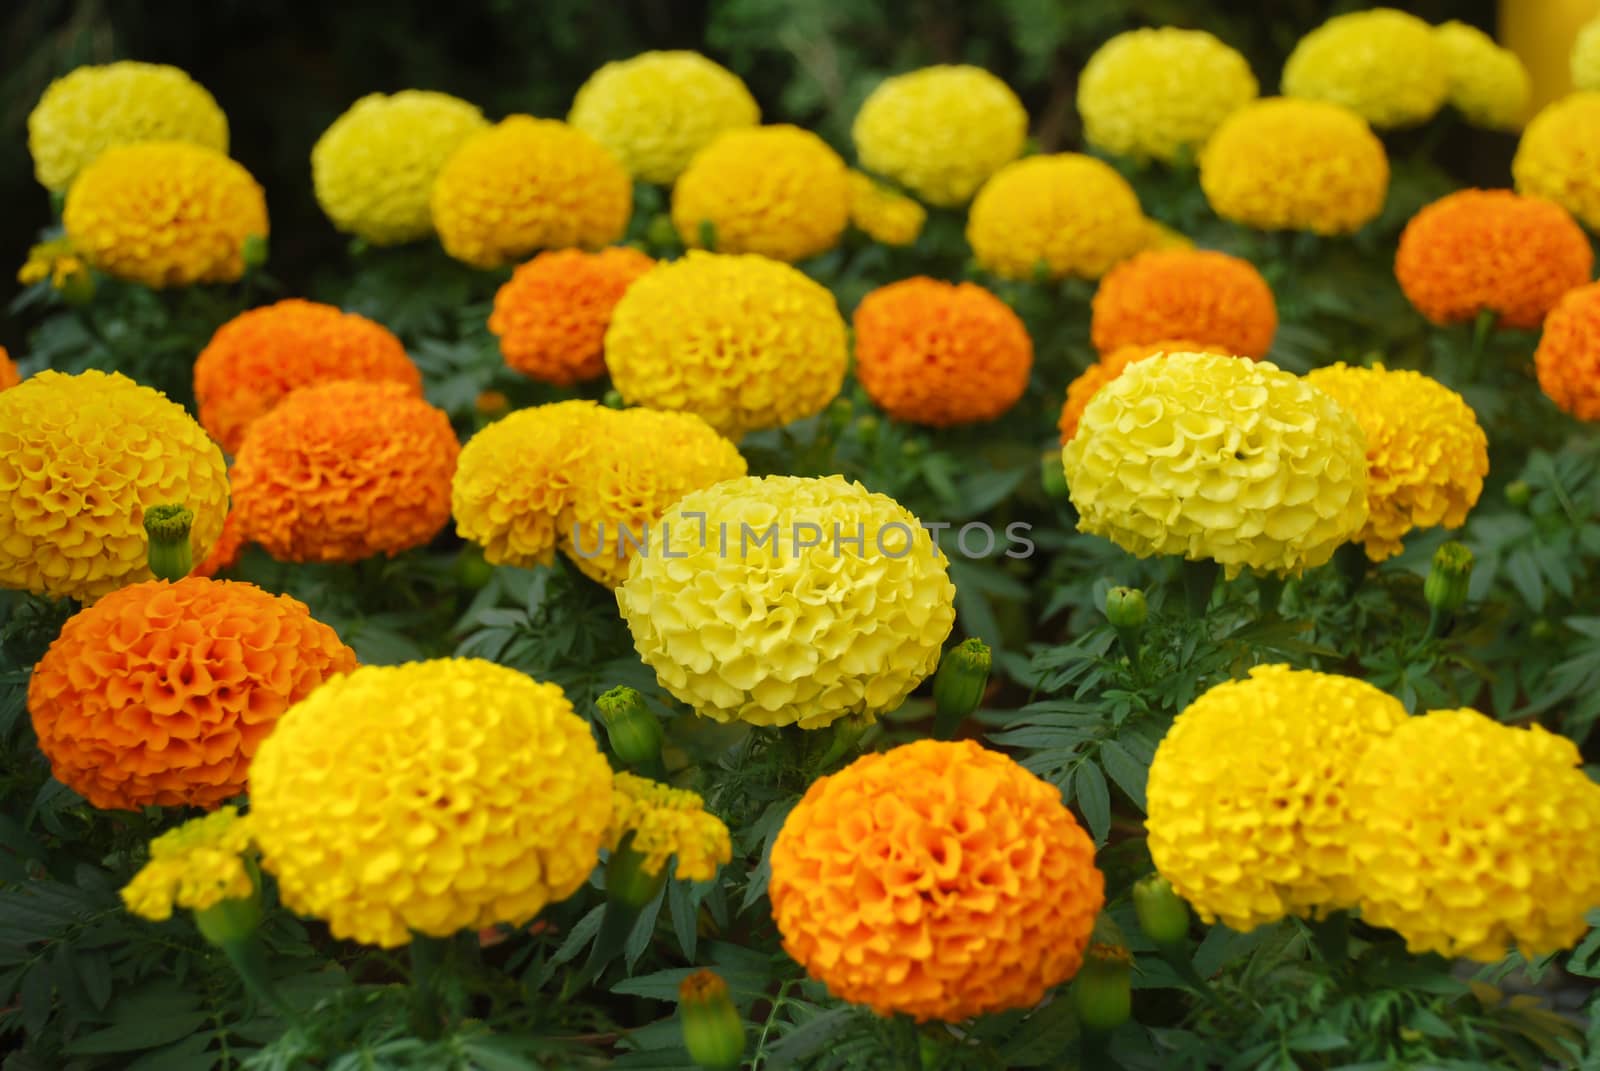 Marigolds Mixed Color (Tagetes erecta, Mexican marigold) by yuiyuize